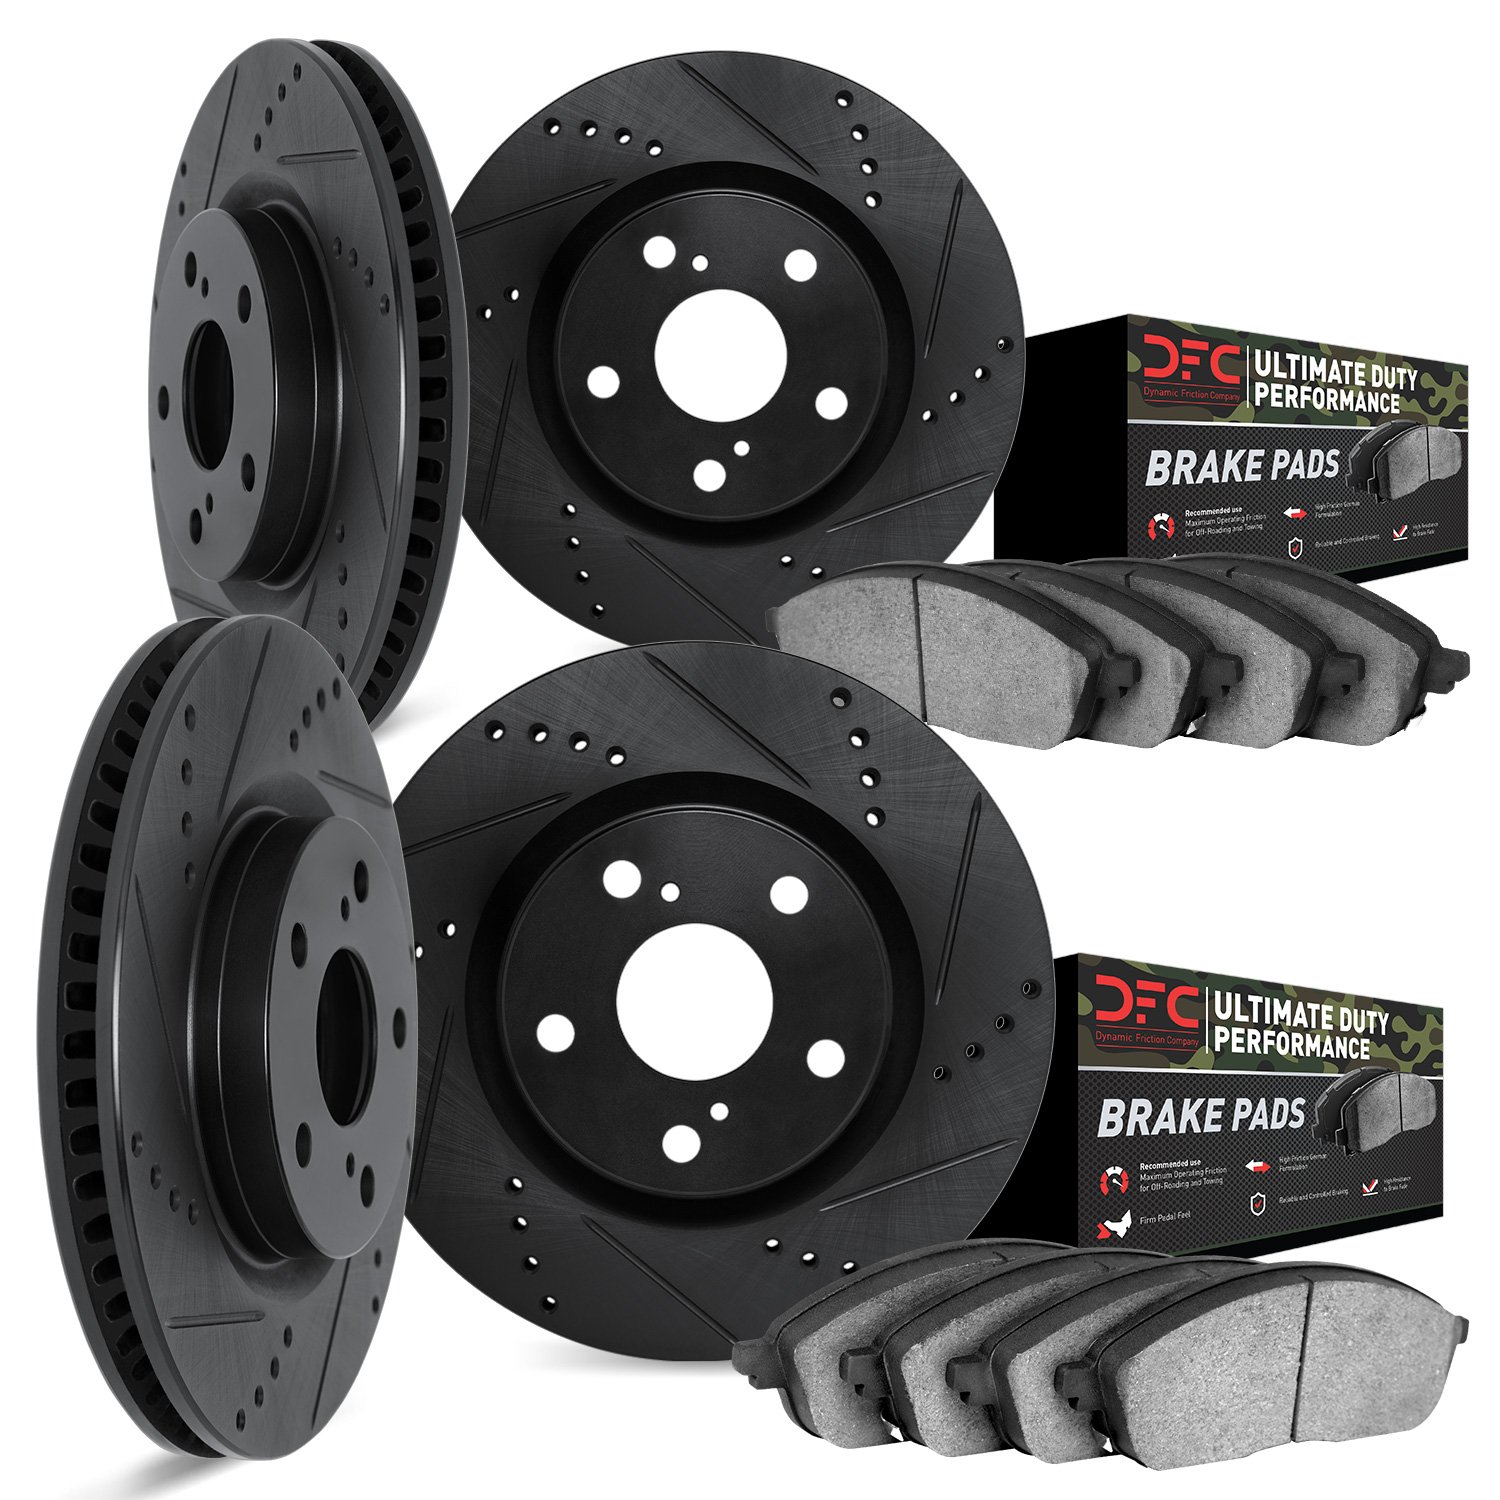 8404-40003 Drilled/Slotted Brake Rotors with Ultimate-Duty Brake Pads Kit [Black], 2008-2012 Mopar, Position: Front and Rear